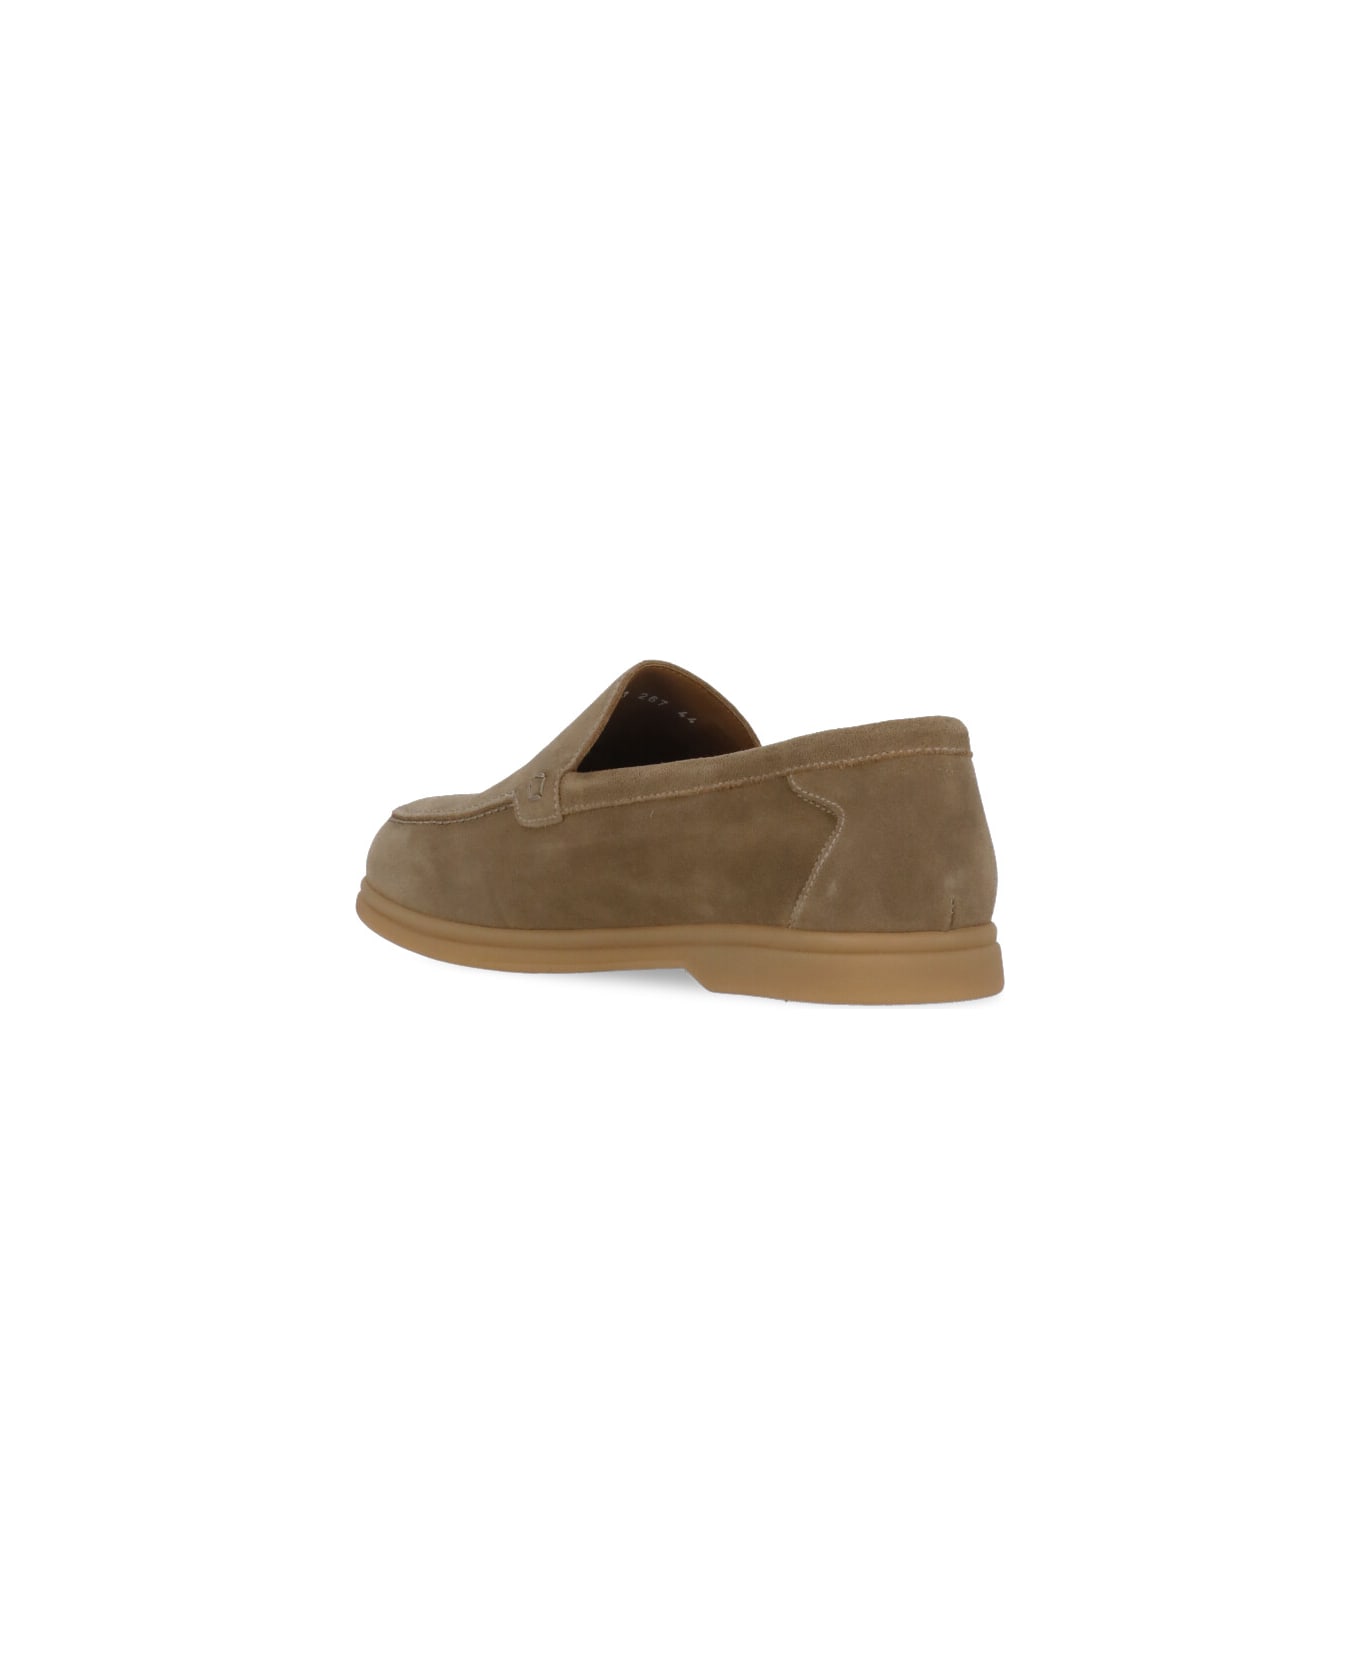 Doucal's Suede Leather Loafers - Beige